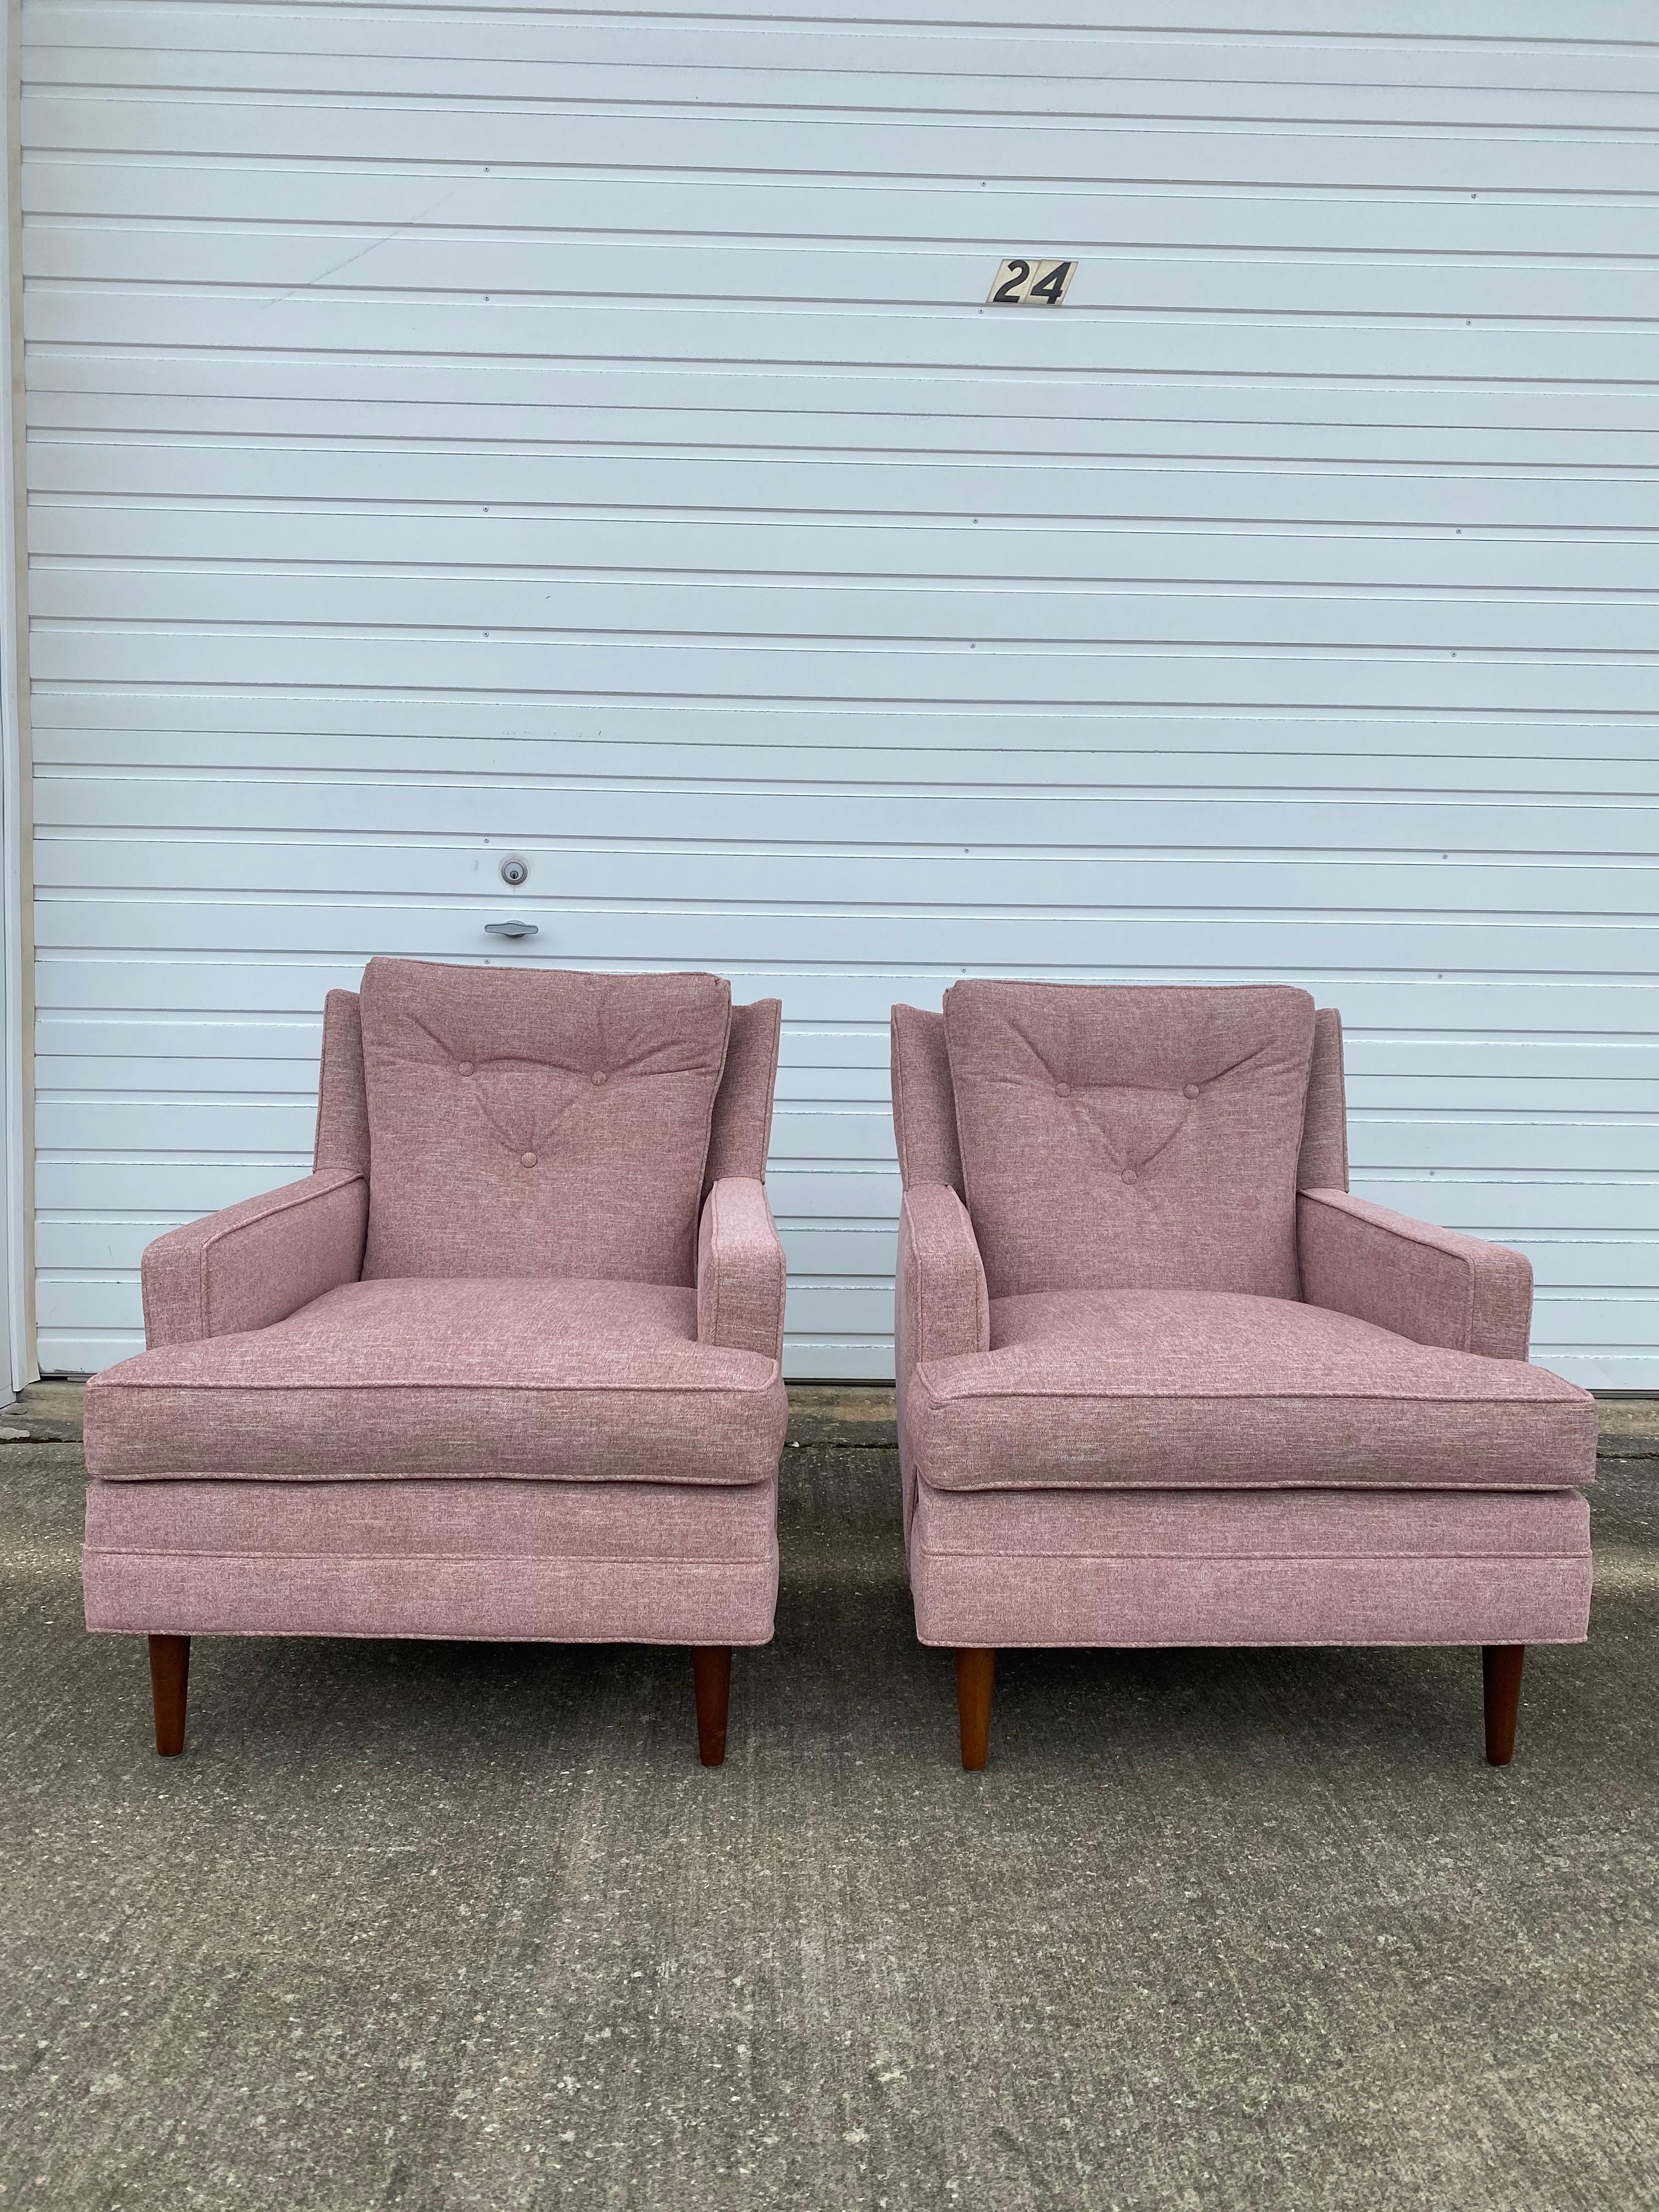 Pair of reupholstered 1960s Flair Club chairs by Bernhardt. These chairs were fully reupholstered in a Crypton 49 Mauve from Great Lakes Fabrics featuring 50,000 double rubs. This is a performance fabric that is stain-resistant. With a full